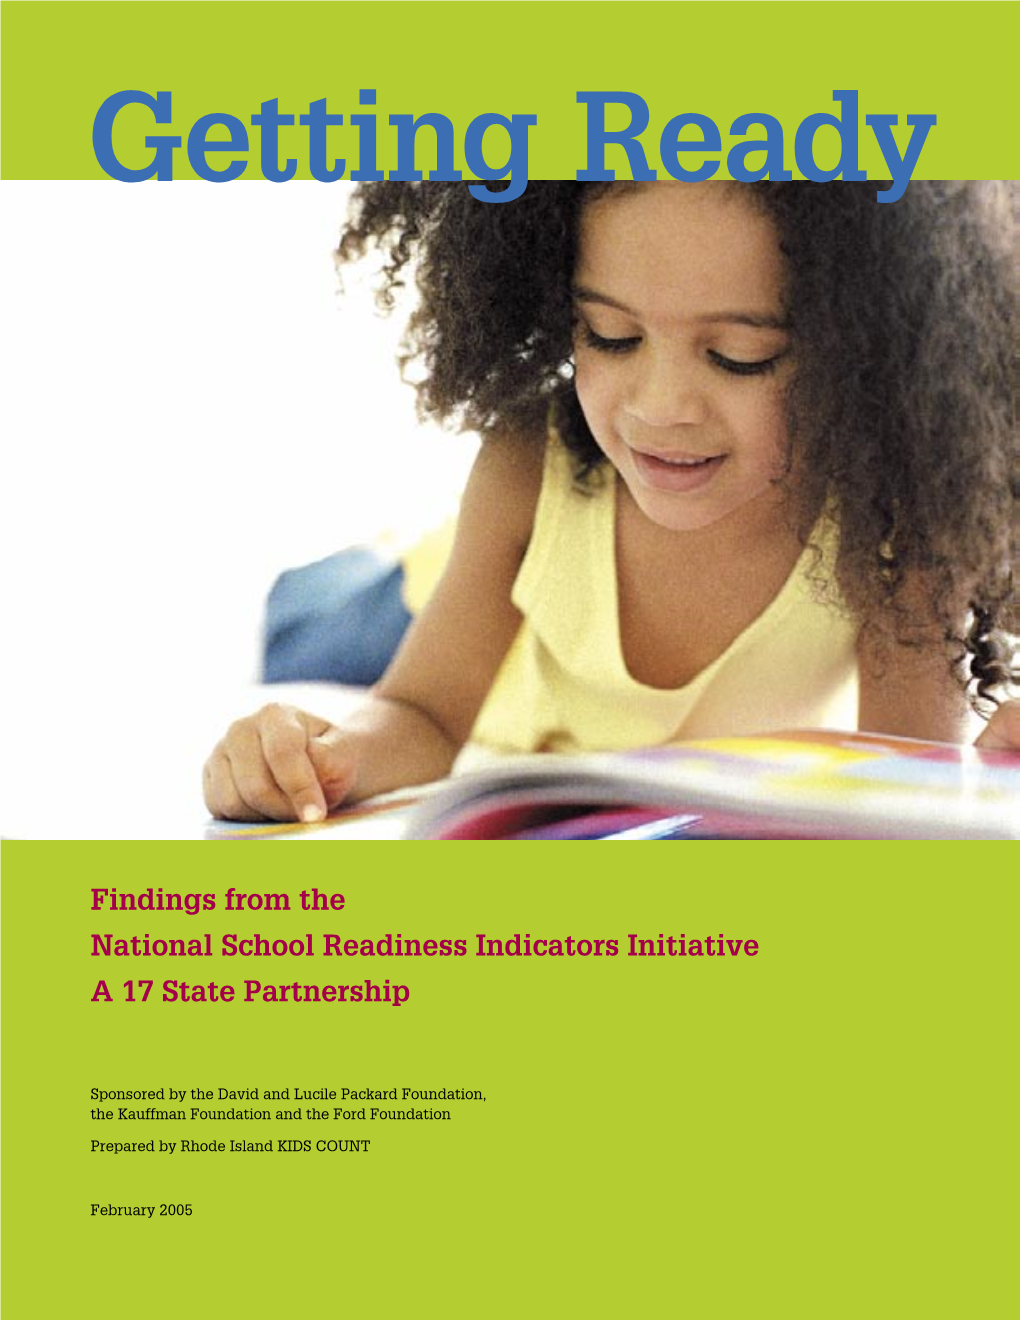 Findings from the National School Readiness Indicators Initiative a 17 State Partnership